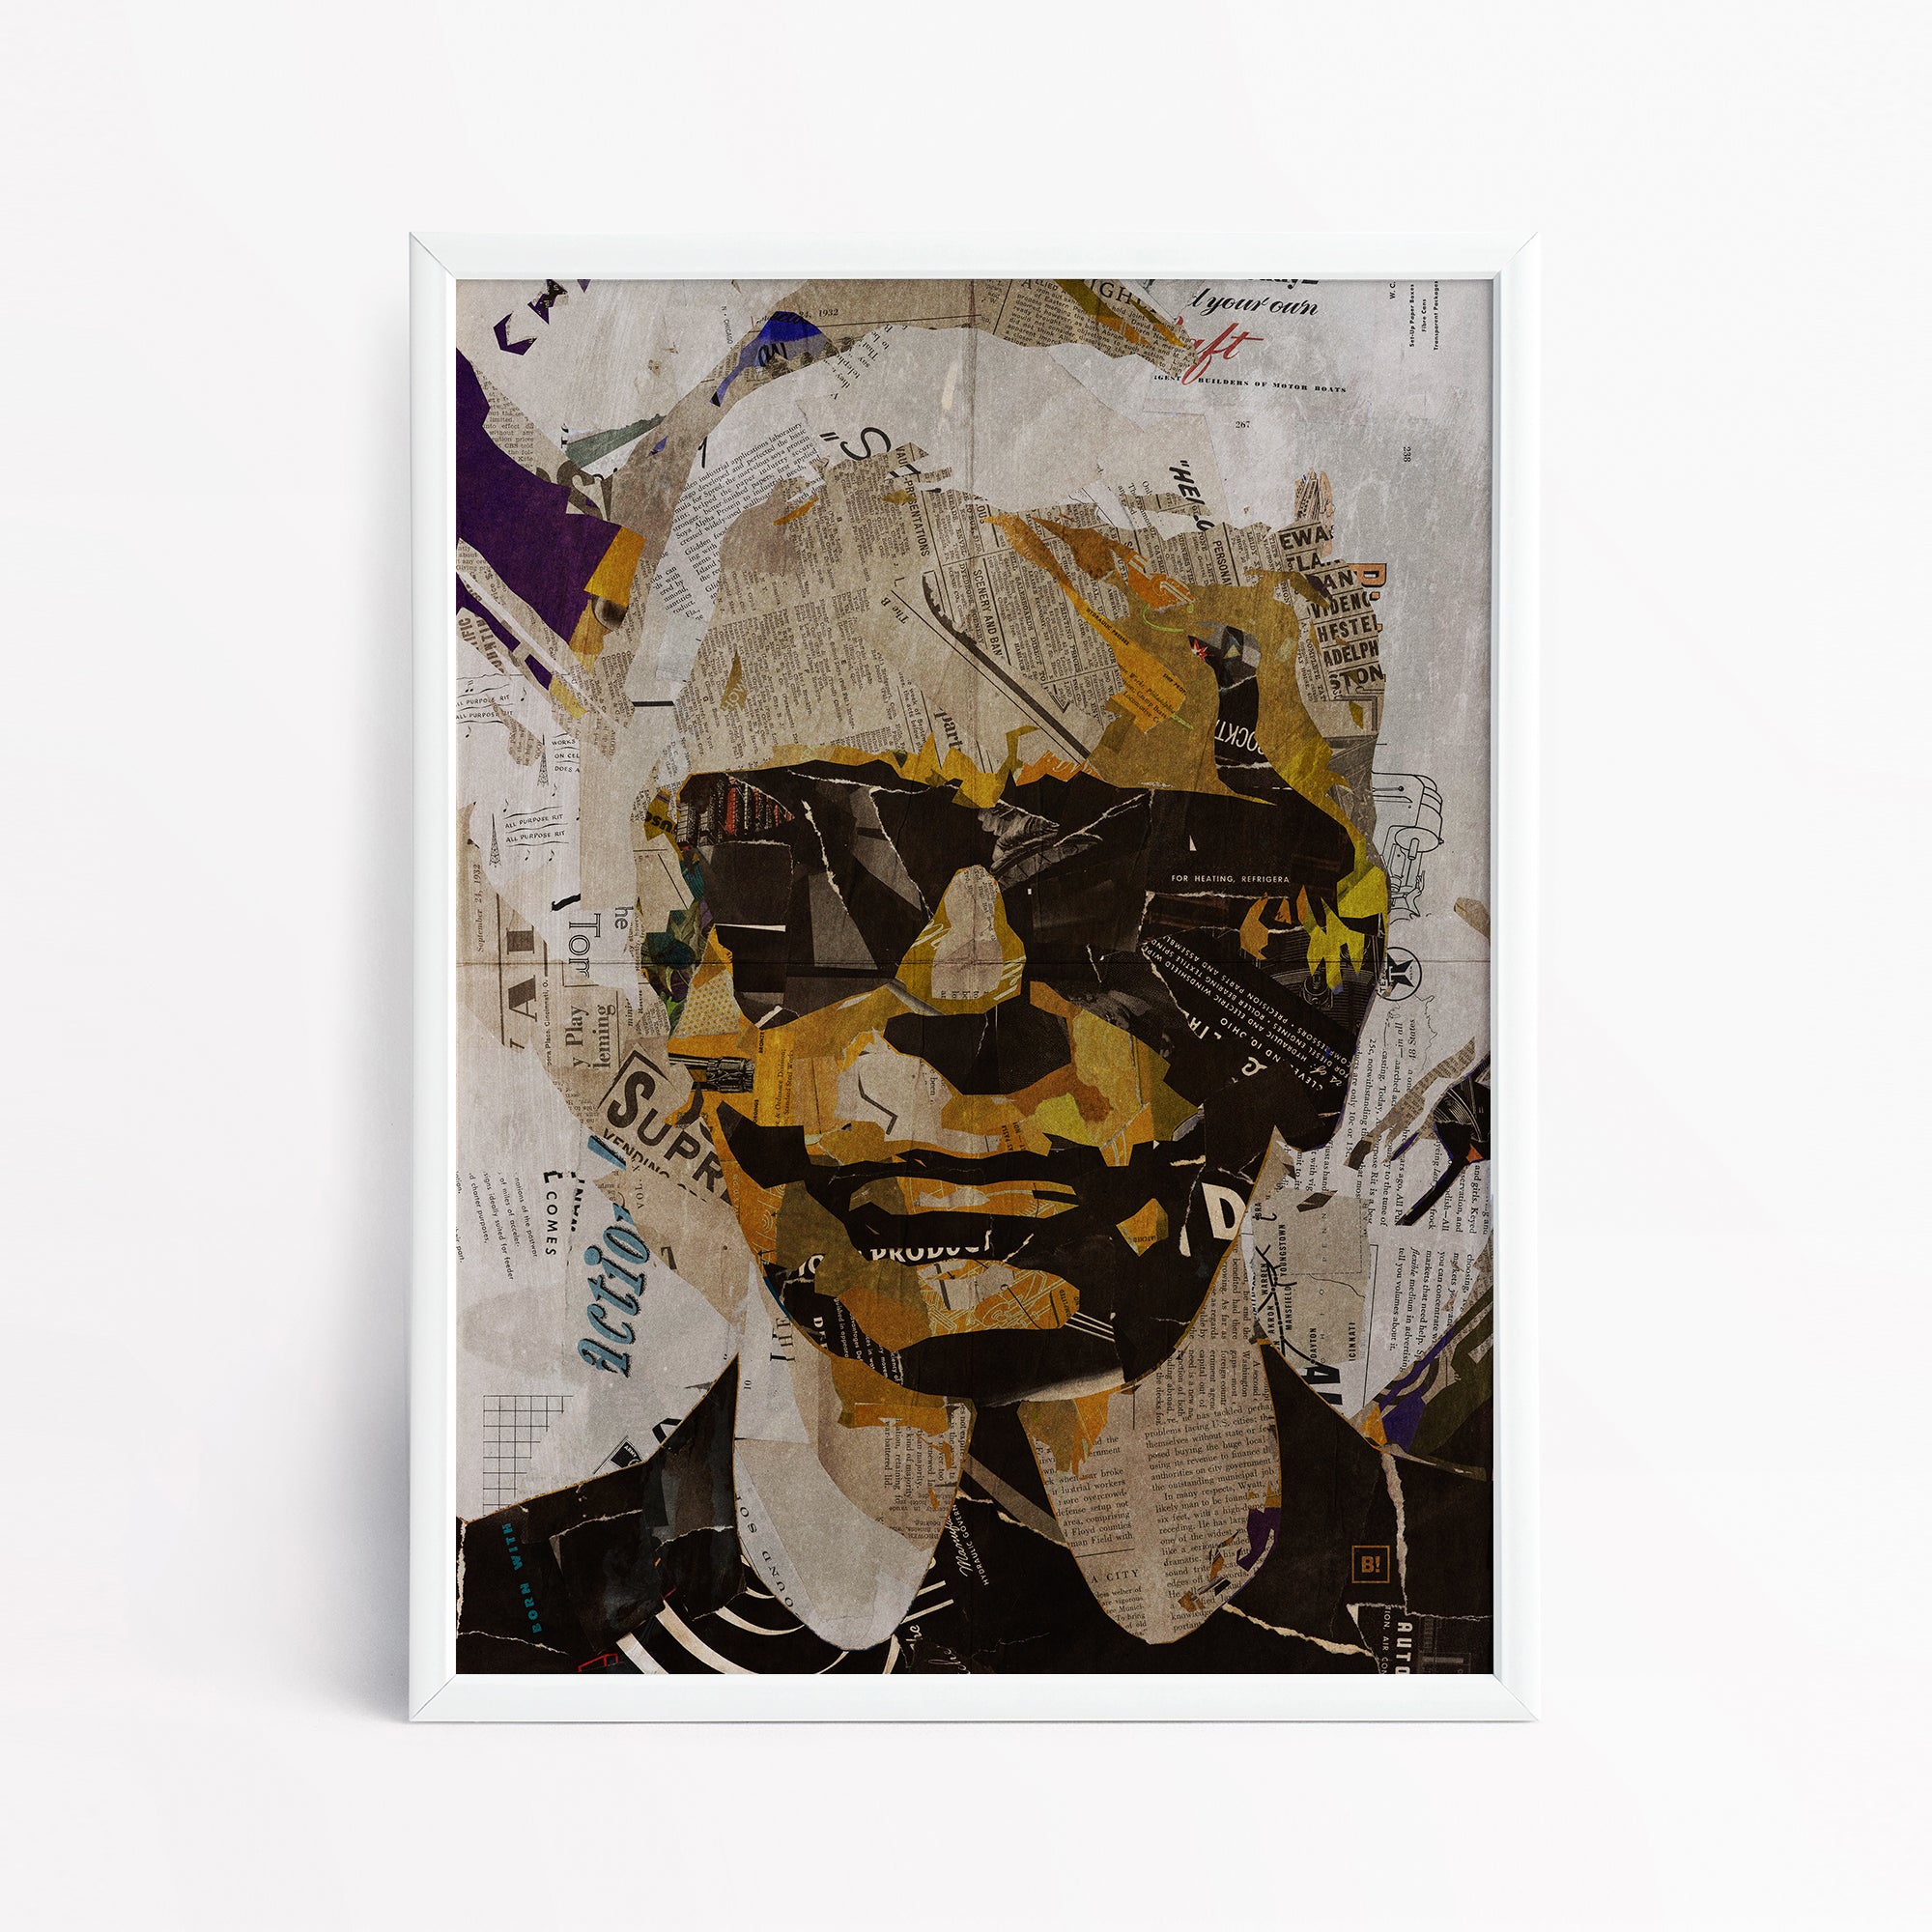 Be inspired by our iconic collage portrait art print of Karl Lagerfeld. This artwork has been printed using the giclée process on archival acid-free paper and is presented in a sleek white frame, showcasing its timeless beauty in every detail.